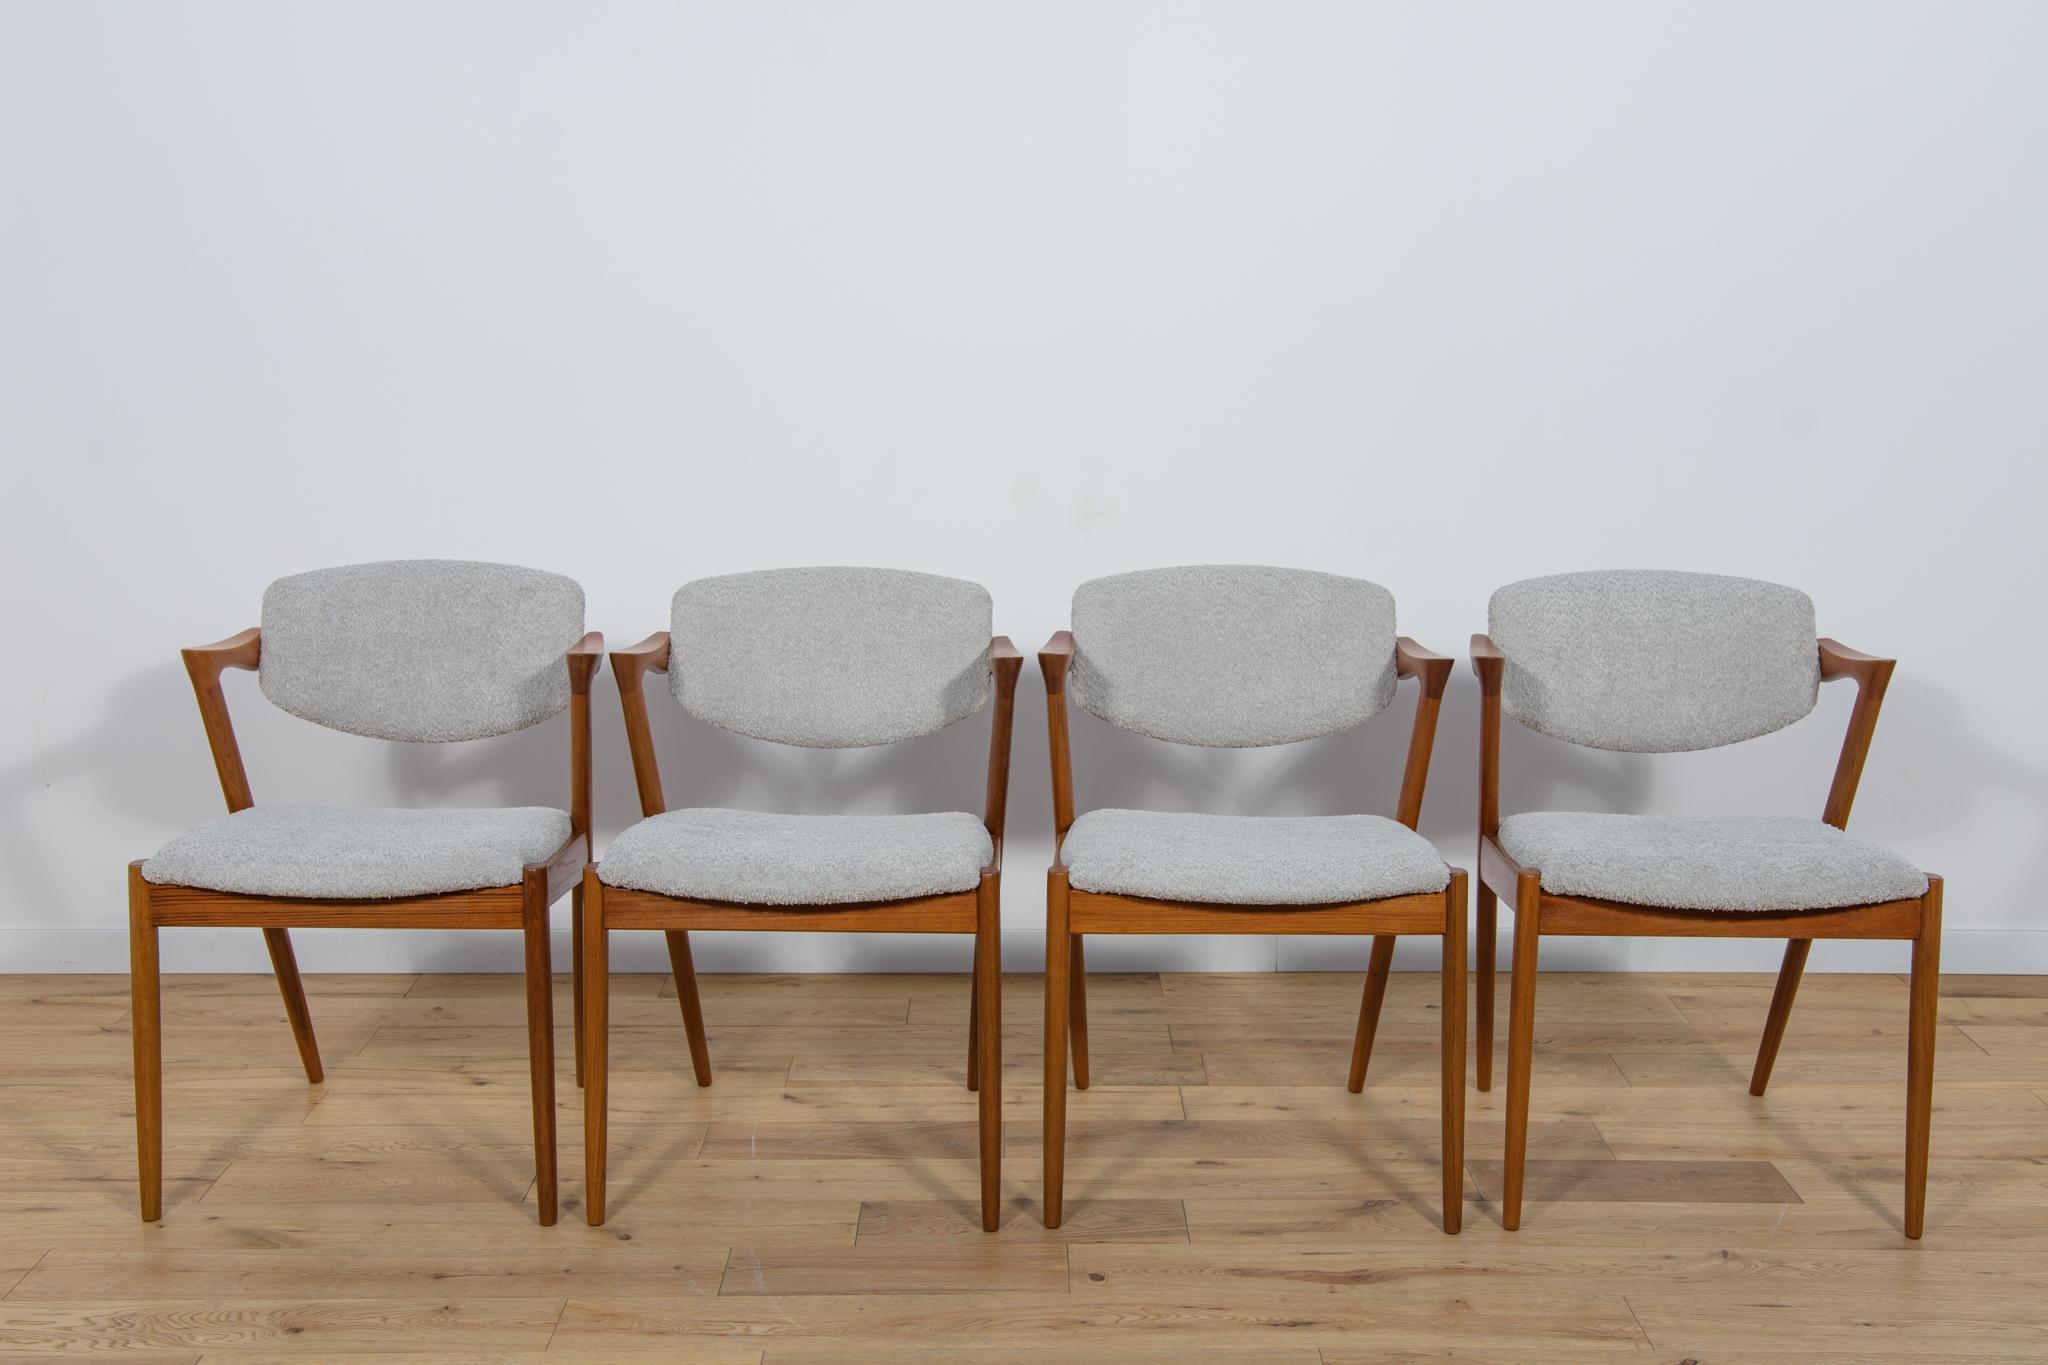 
A set of four chairs model 42 designed by Kai Kristiansen for the Danish manufacture Schou-Andersens Møbelfabrik in the 1960s. Frame made of teak. Completely restored. Wood has been cleaned of old coating, finished with quality Danish Oil. Foams